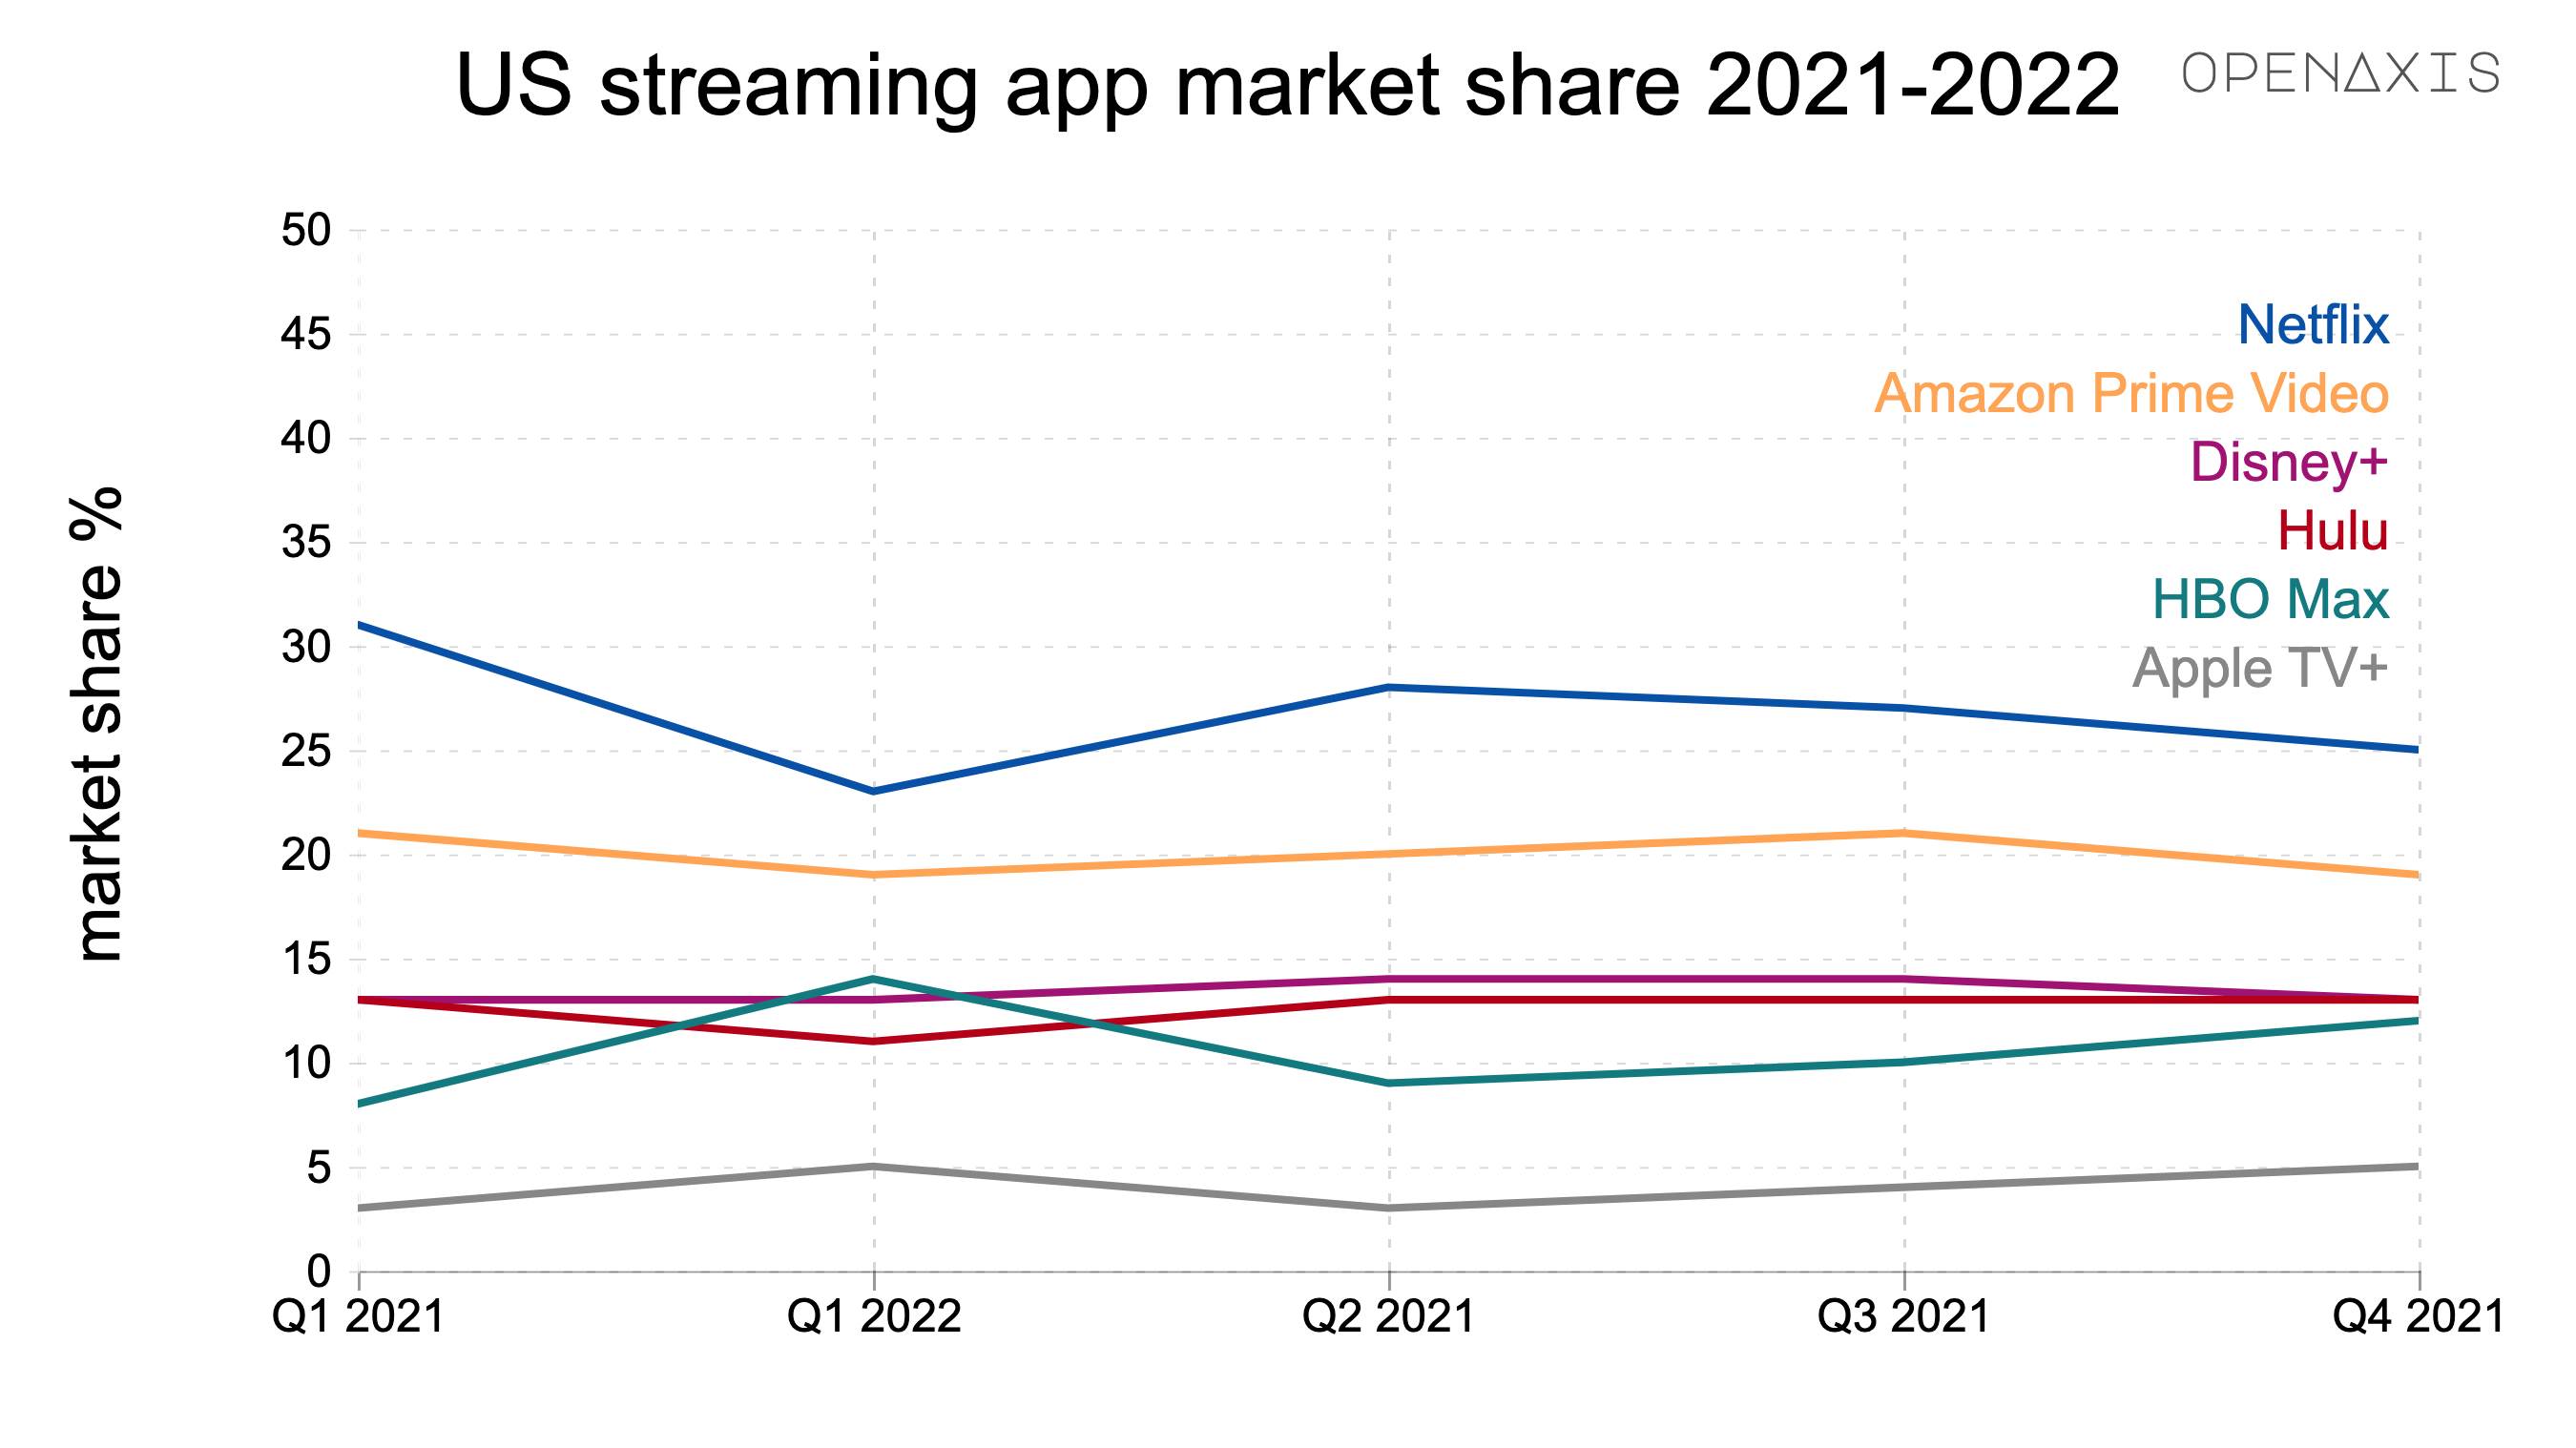 <p>According to Business of Apps, "netflix is still in the lead for streaming app market share in the United States, but has been losing market share every quarter since Q1 2021. The launch of Paramount, Apple TV+, and Peacock has also diluted the market."  As of Q1 2022, Netflix still leads with a 23% market share, a drop from 31% in Q1 2021. HBO Max increased from 8% in Q1 2021 to 14% in Q1 2022. Yet, the future of HBO Max remains uncertain as it merges into a single streaming service with Discovery+.</p><p><br /></p><p>More info <a href="https://www.businessofapps.com/data/video-streaming-app-market/" target="_blank">here</a>.</p>